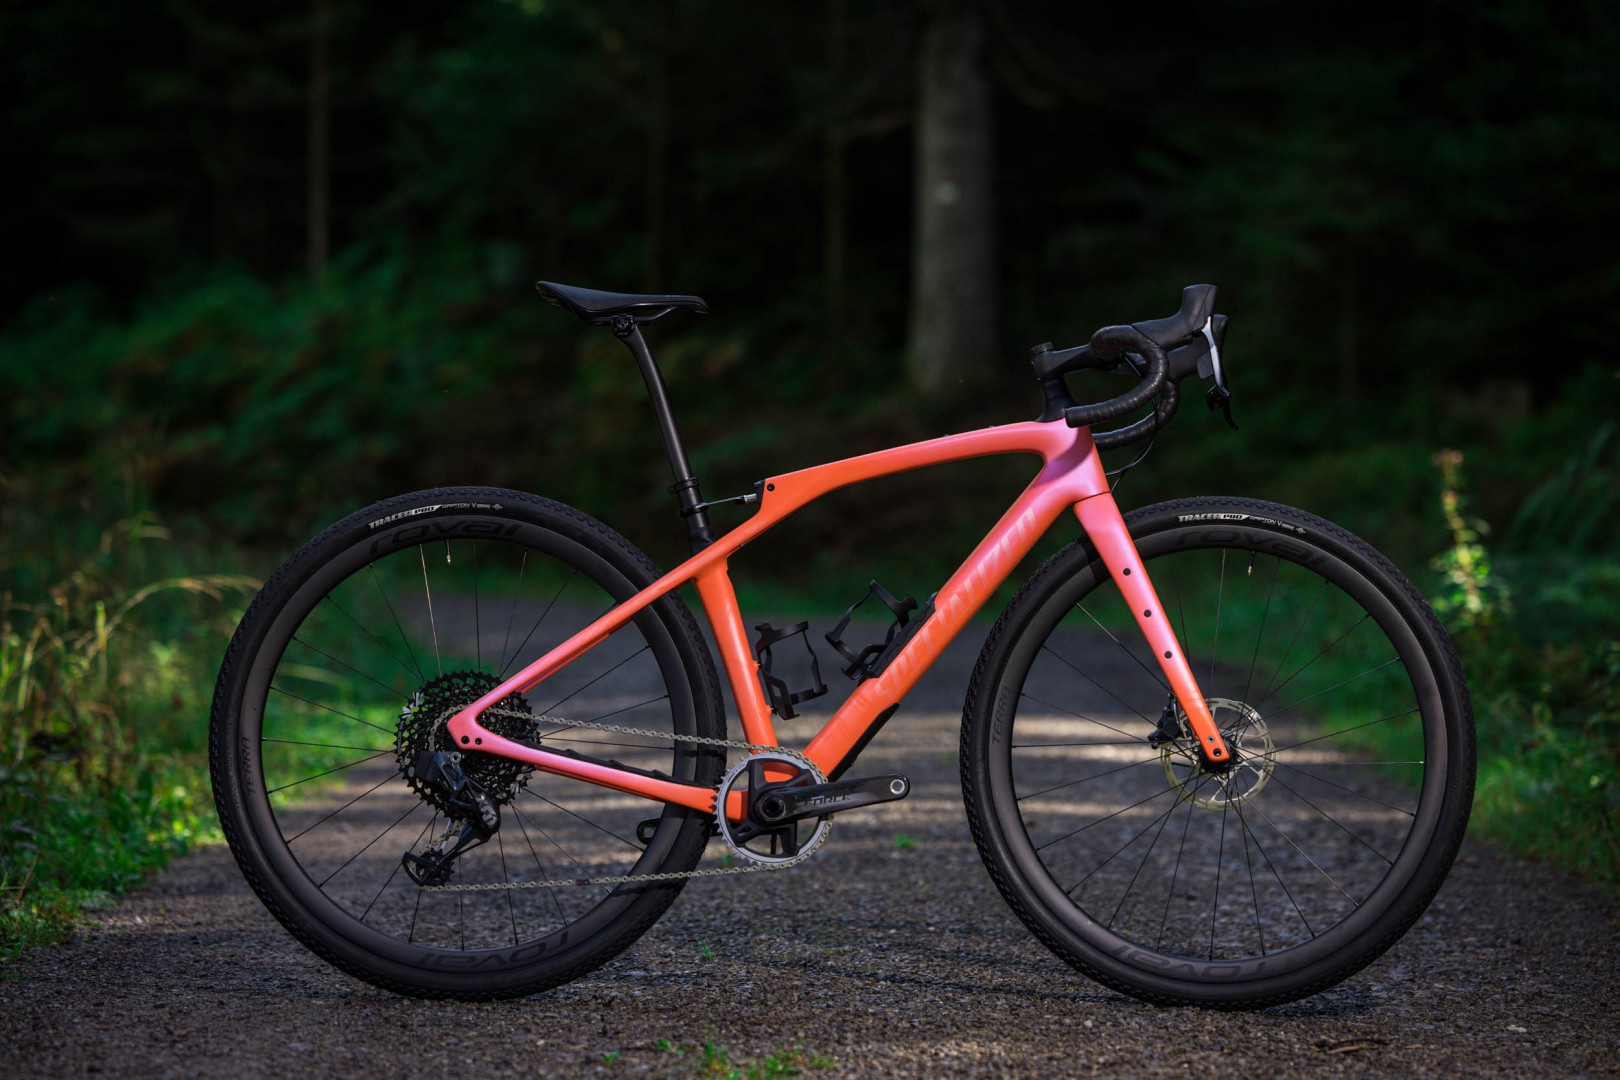 Specialized Diverge цена. Specialized diverge